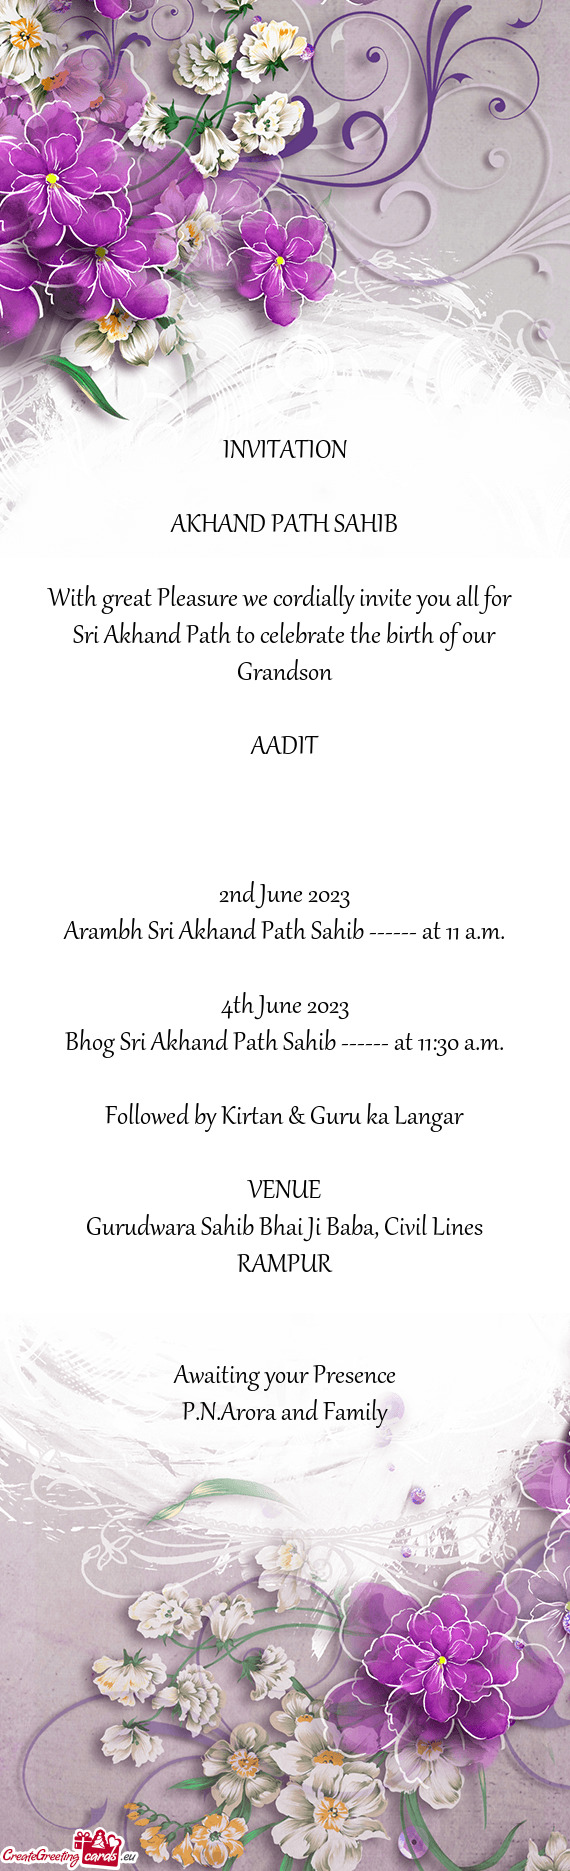 Sri Akhand Path to celebrate the birth of our Grandson